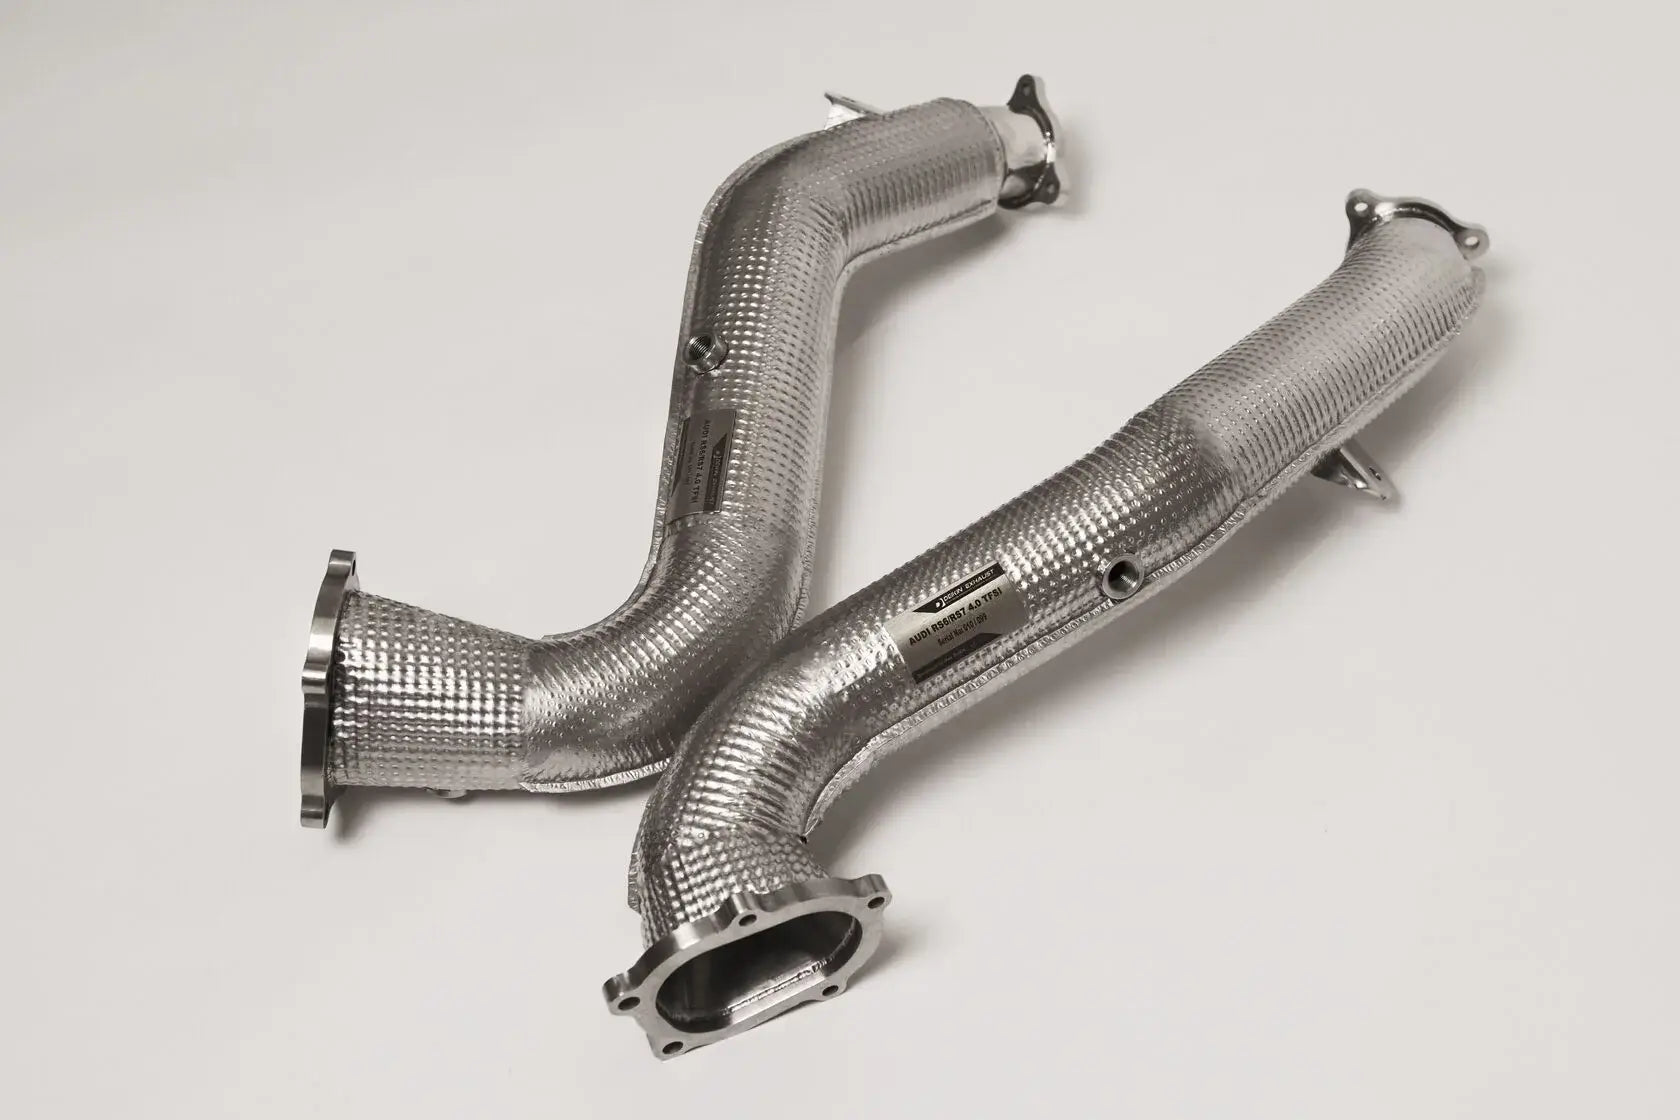 DEIKIN 10-AUDI.RS6.C7-DP Downpipe for AUDI RS6 (C7) without HeatShield Photo-2 